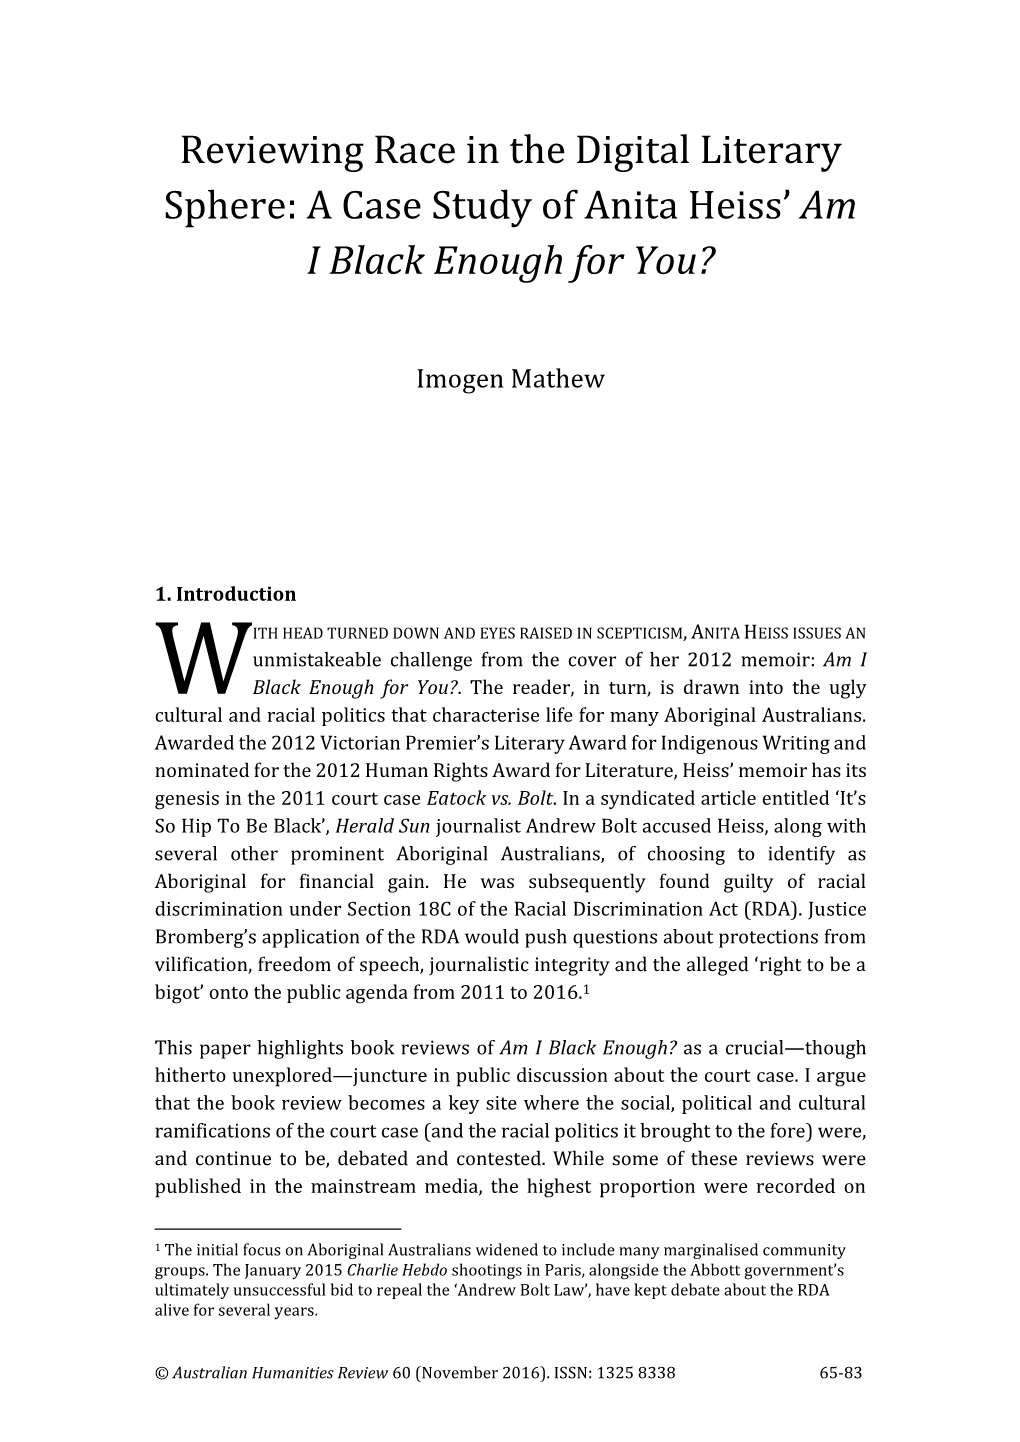 Reviewing Race in the Digital Literary Sphere: a Case Study of Anita Heiss’ Am I Black Enough for You?